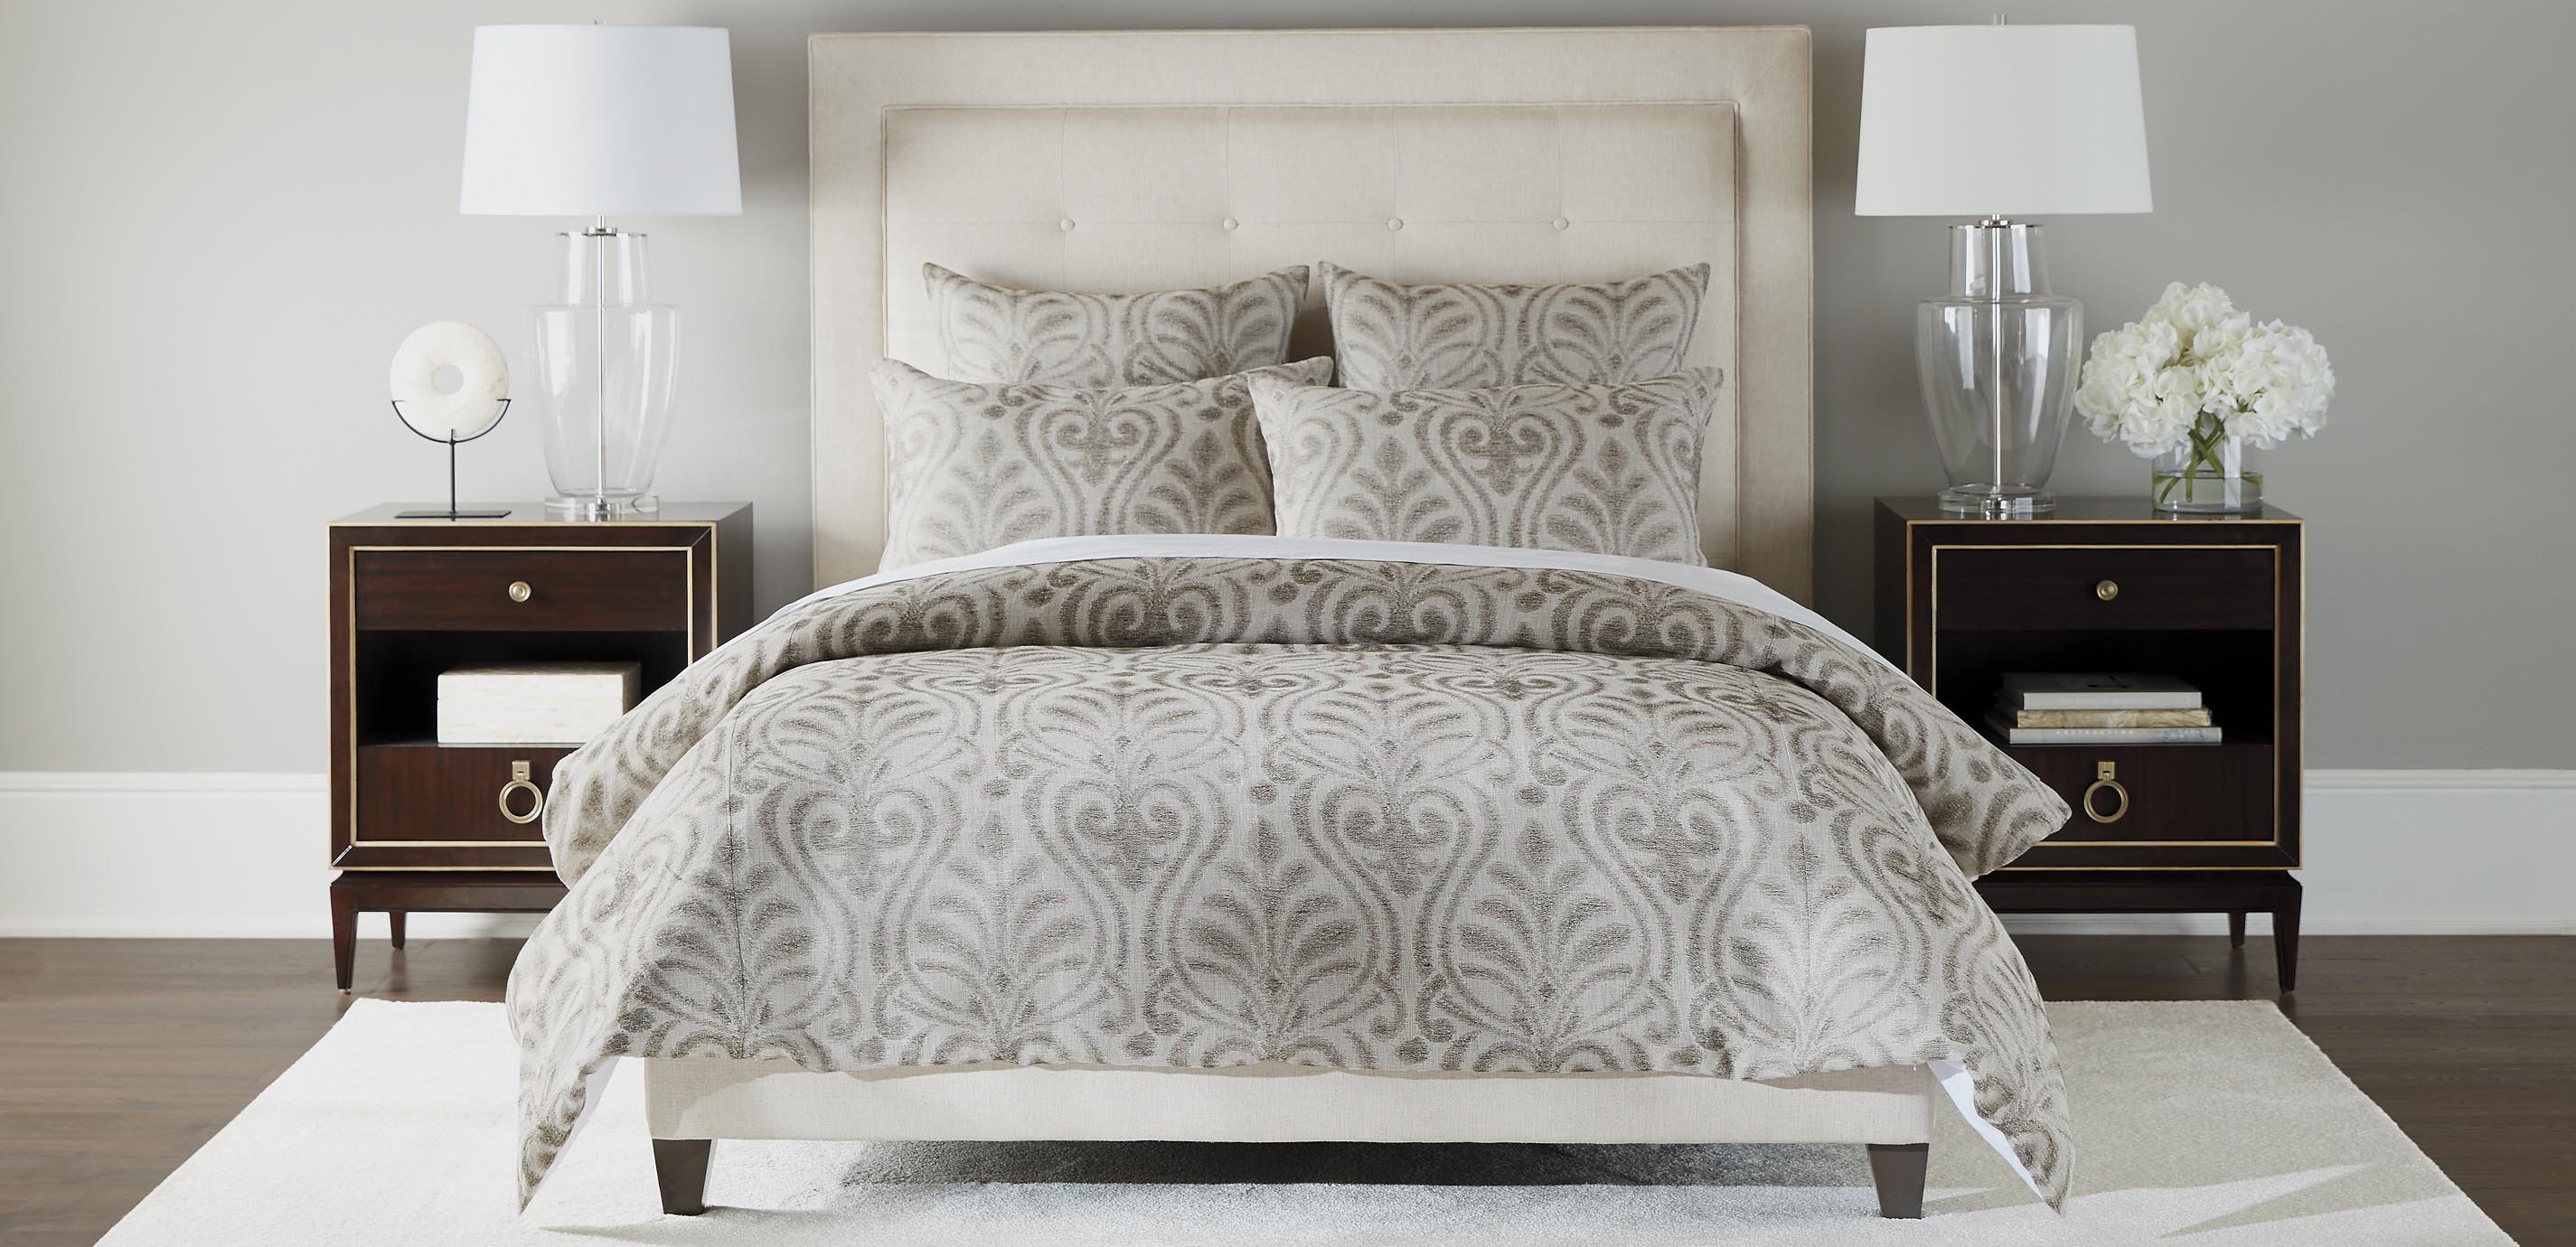 Washed Linen Scroll Duvet Cover